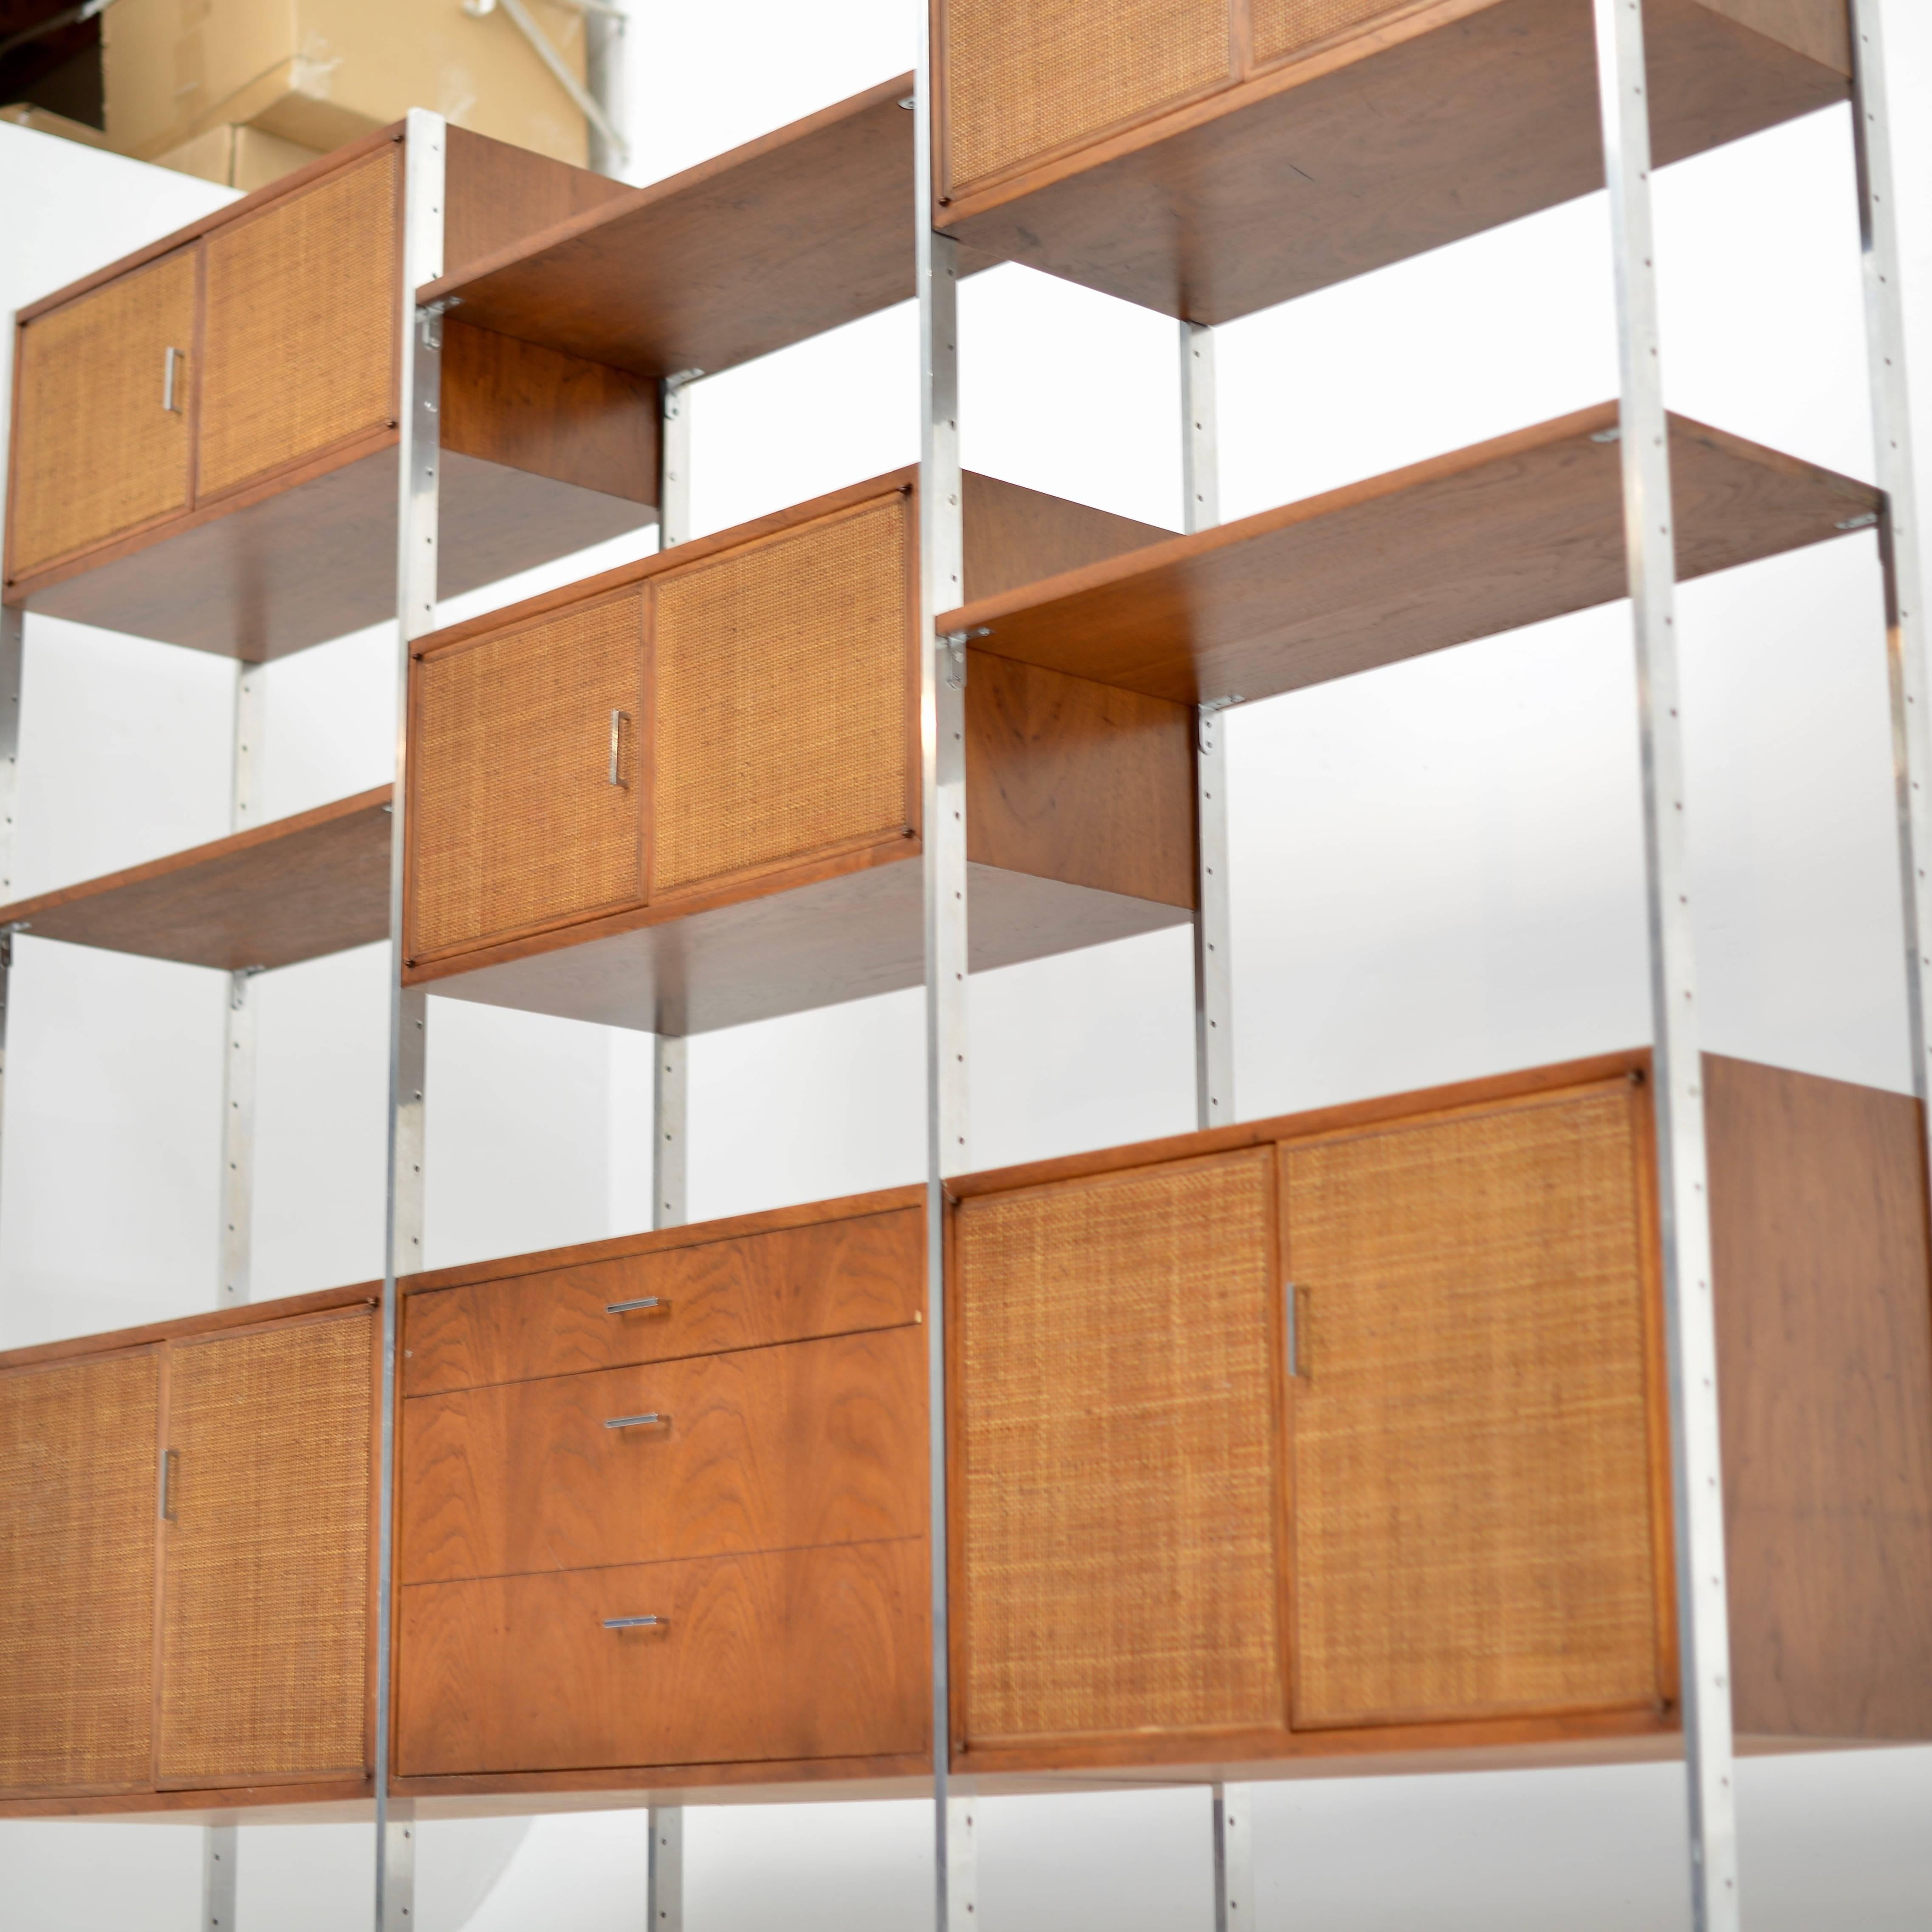 This is a stunning modern wall unit by Founders, a Division of Knoll International, attributed to Milo Baughman.
Aluminium supports with walnut shelves, cabinets and drawers, with woven cane doors.